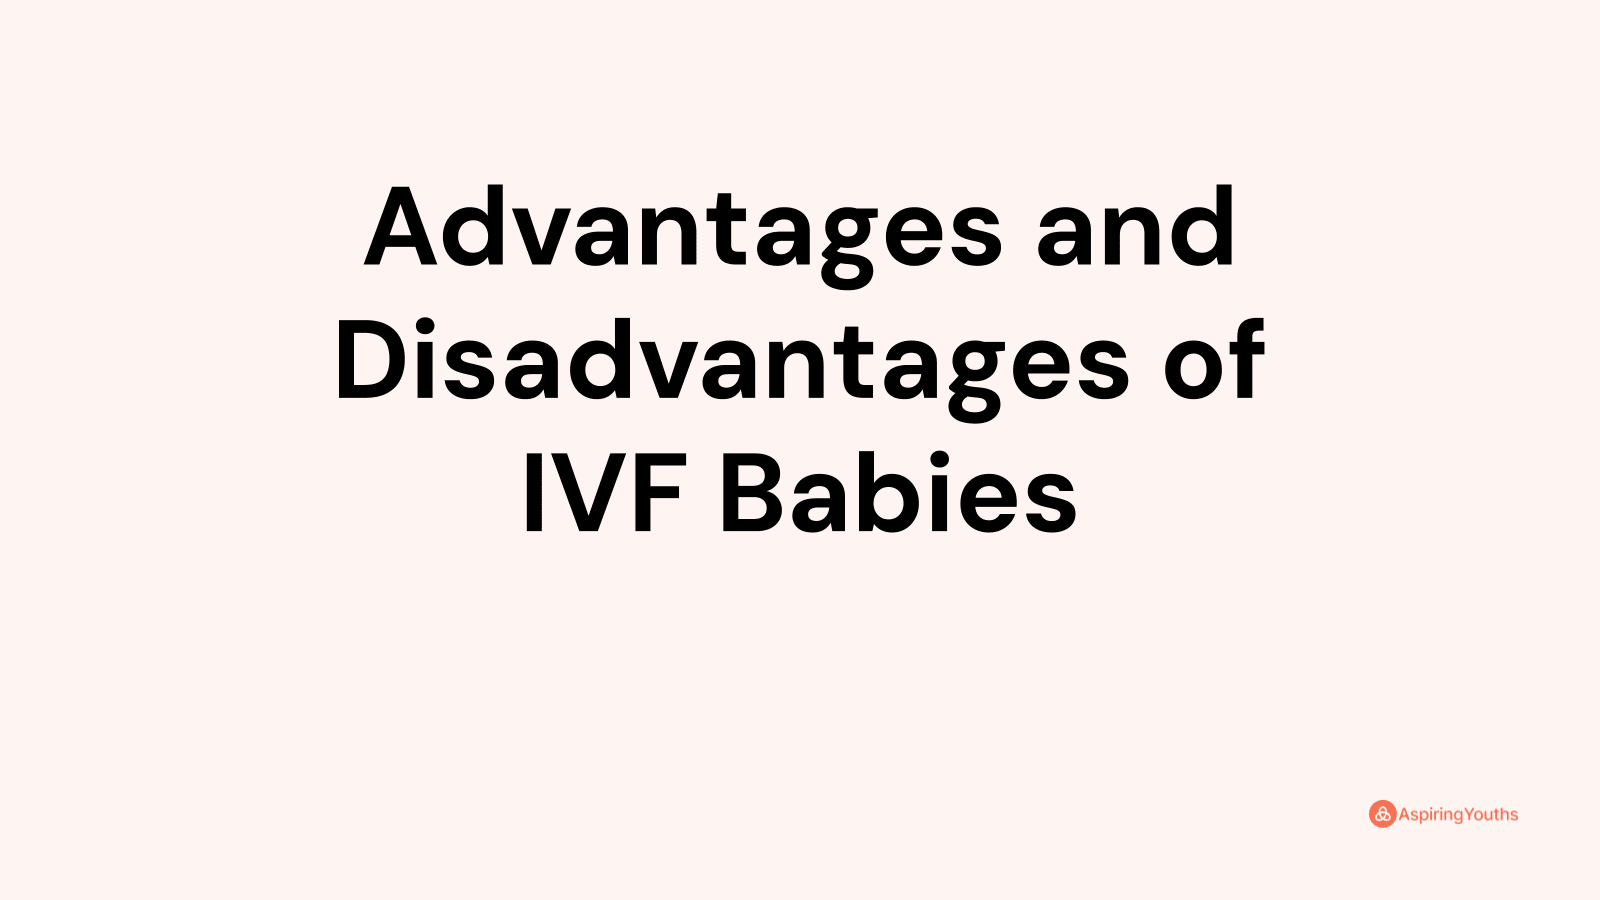 Advantages and disadvantages of IVF Babies